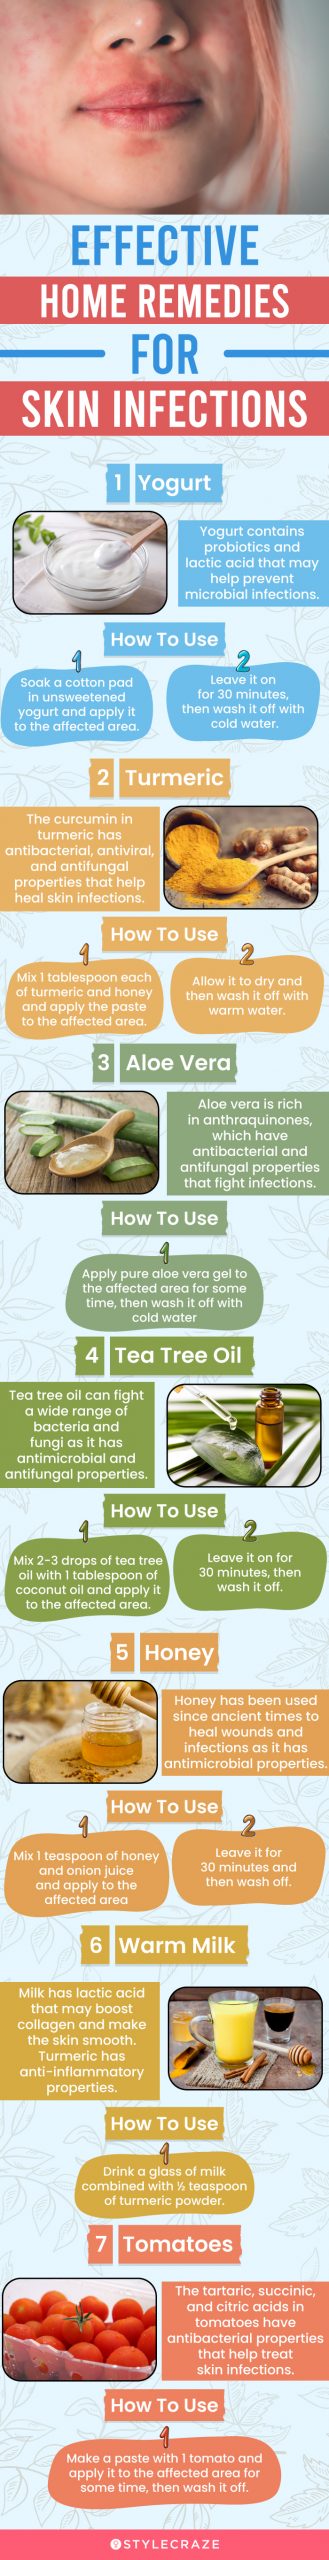 effective home remedies for skin infections (infographic)